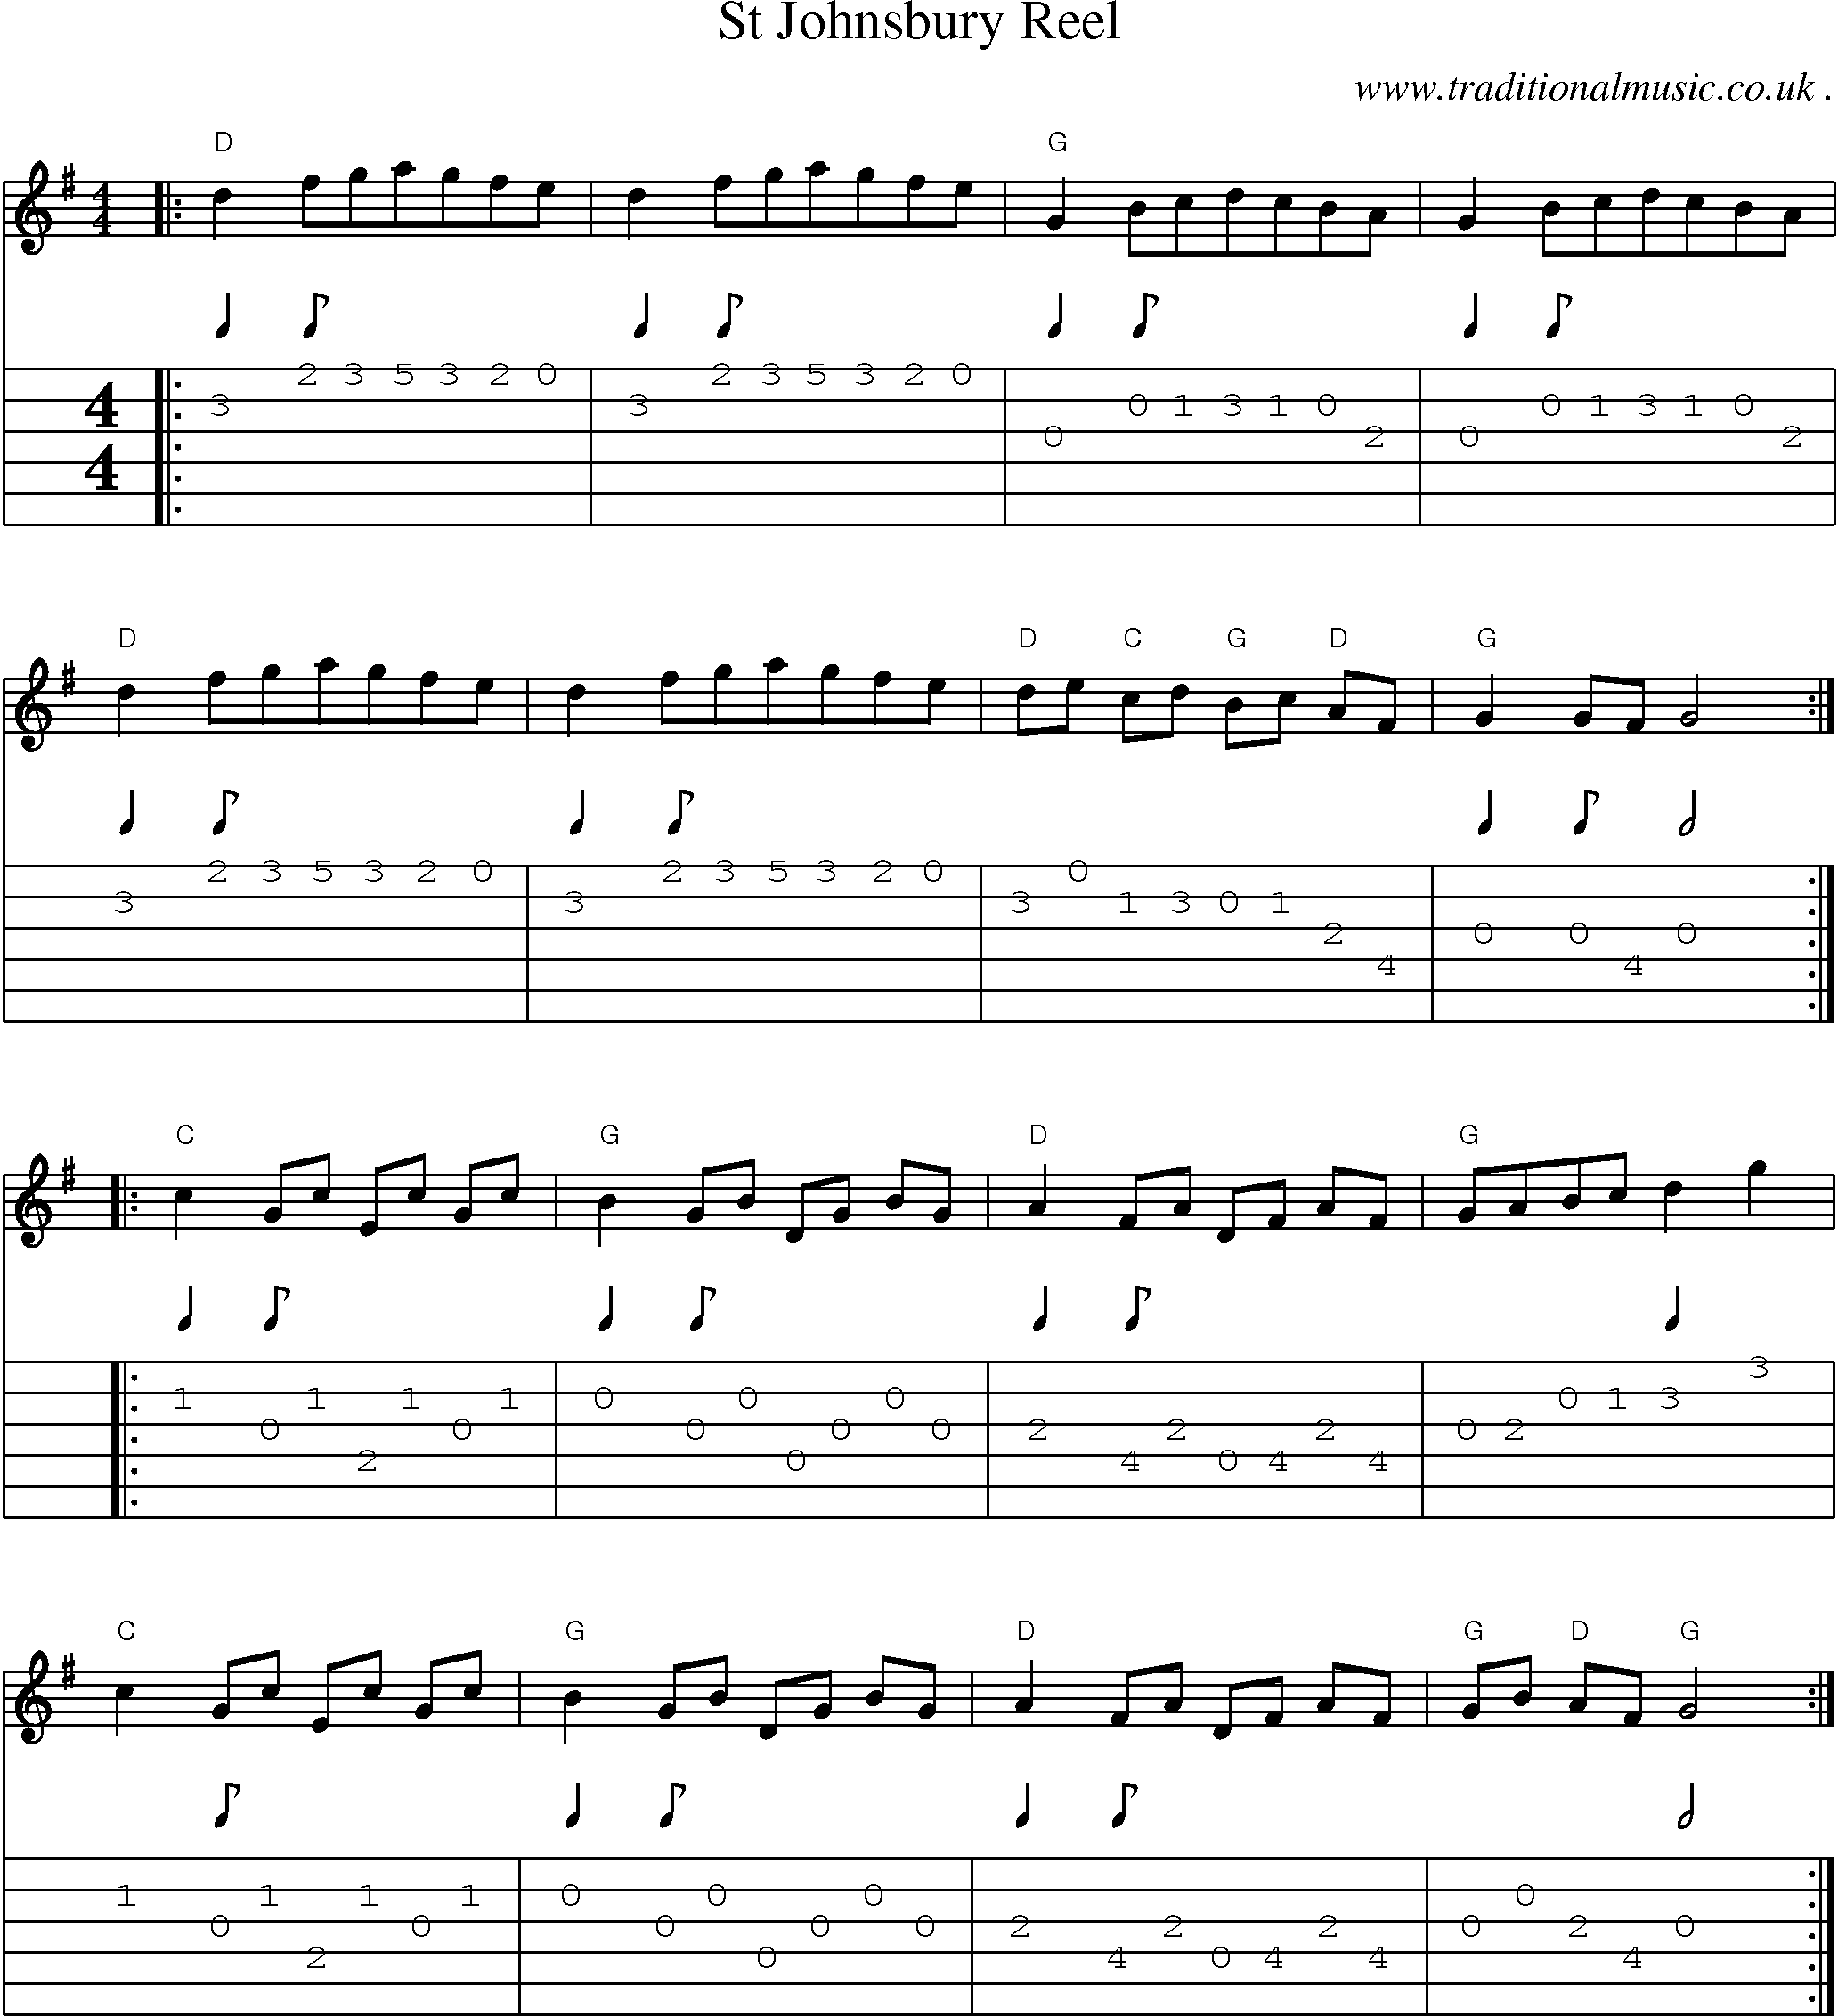 Music Score and Guitar Tabs for St Johnsbury Reel